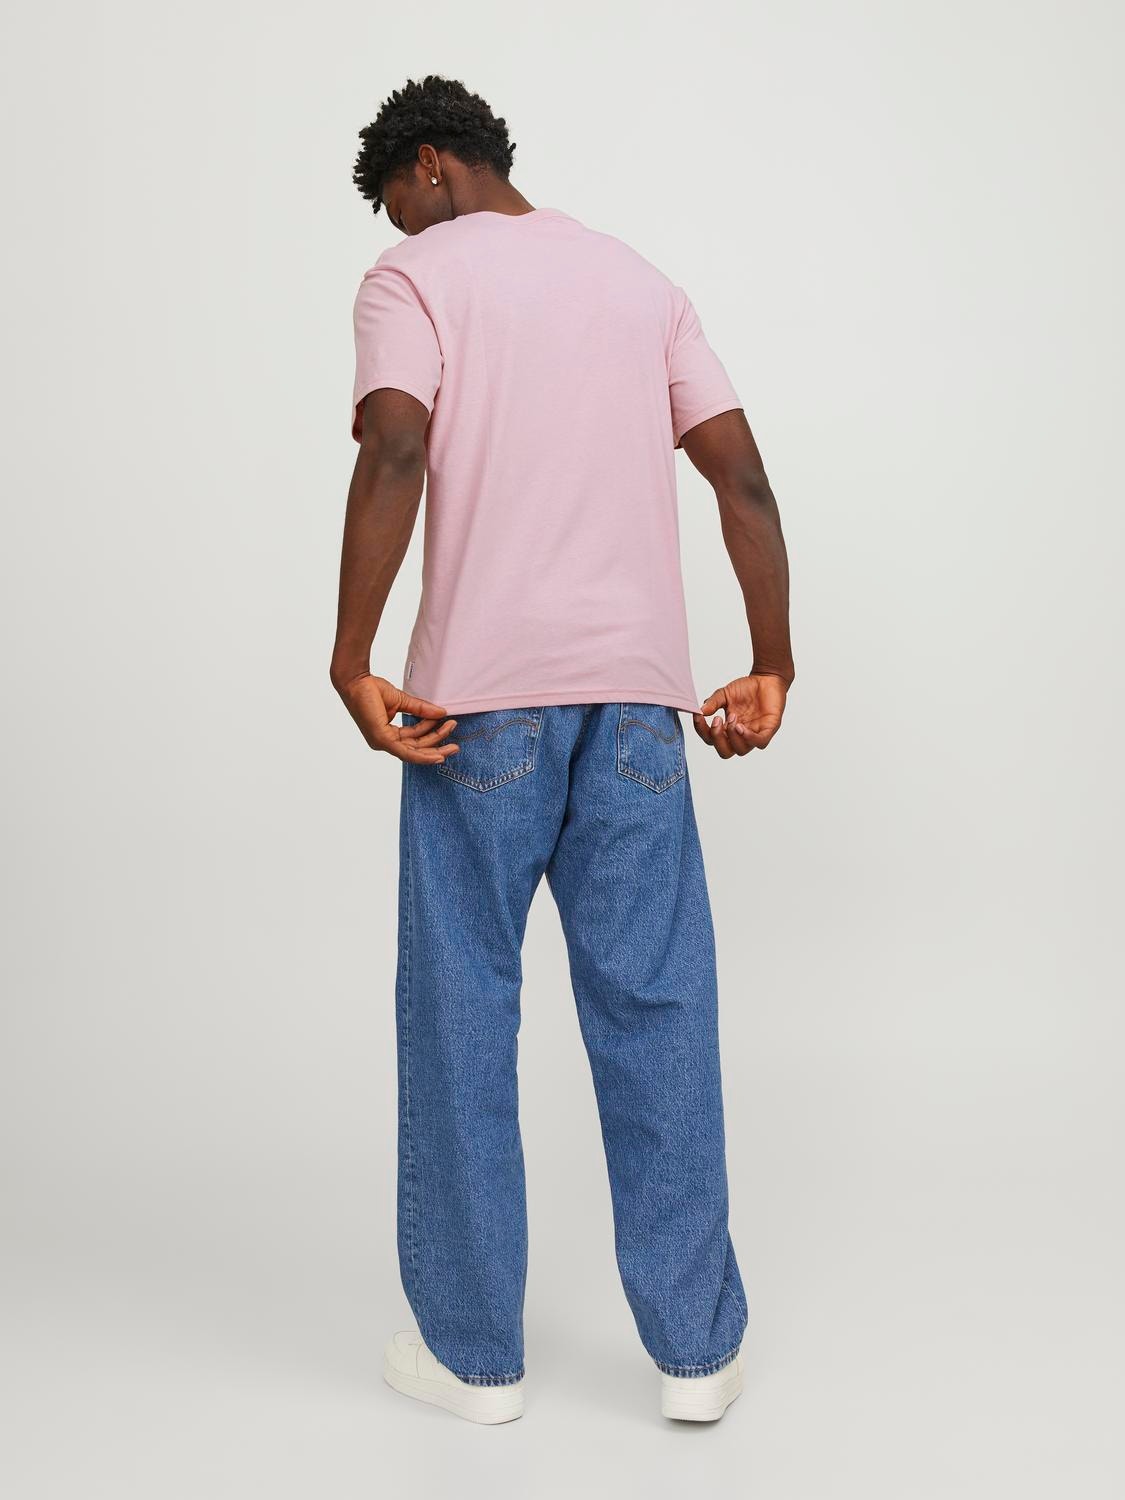 Jack & Jones Relaxed Fit Round Neck T-Shirt -Pink Nectar - 12253613